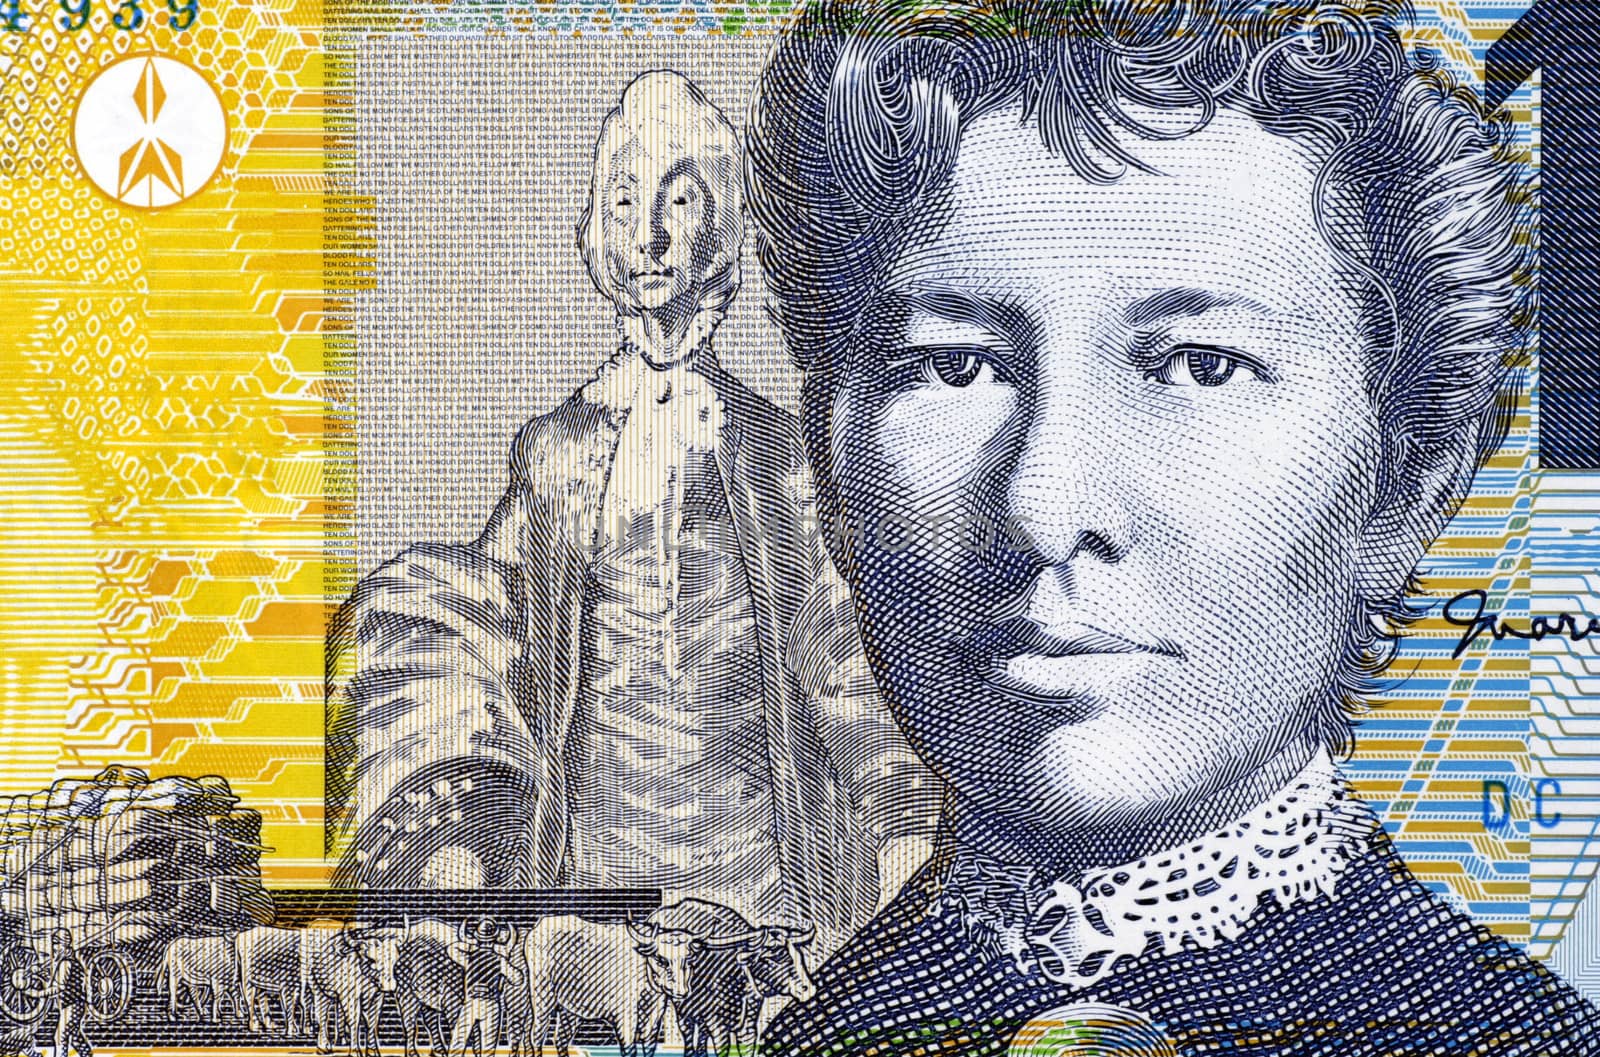 Mary Gilmore (1865-1962) on 10 Dollars 2007 Banknote from Australia. Australian socialist poet and journalist.